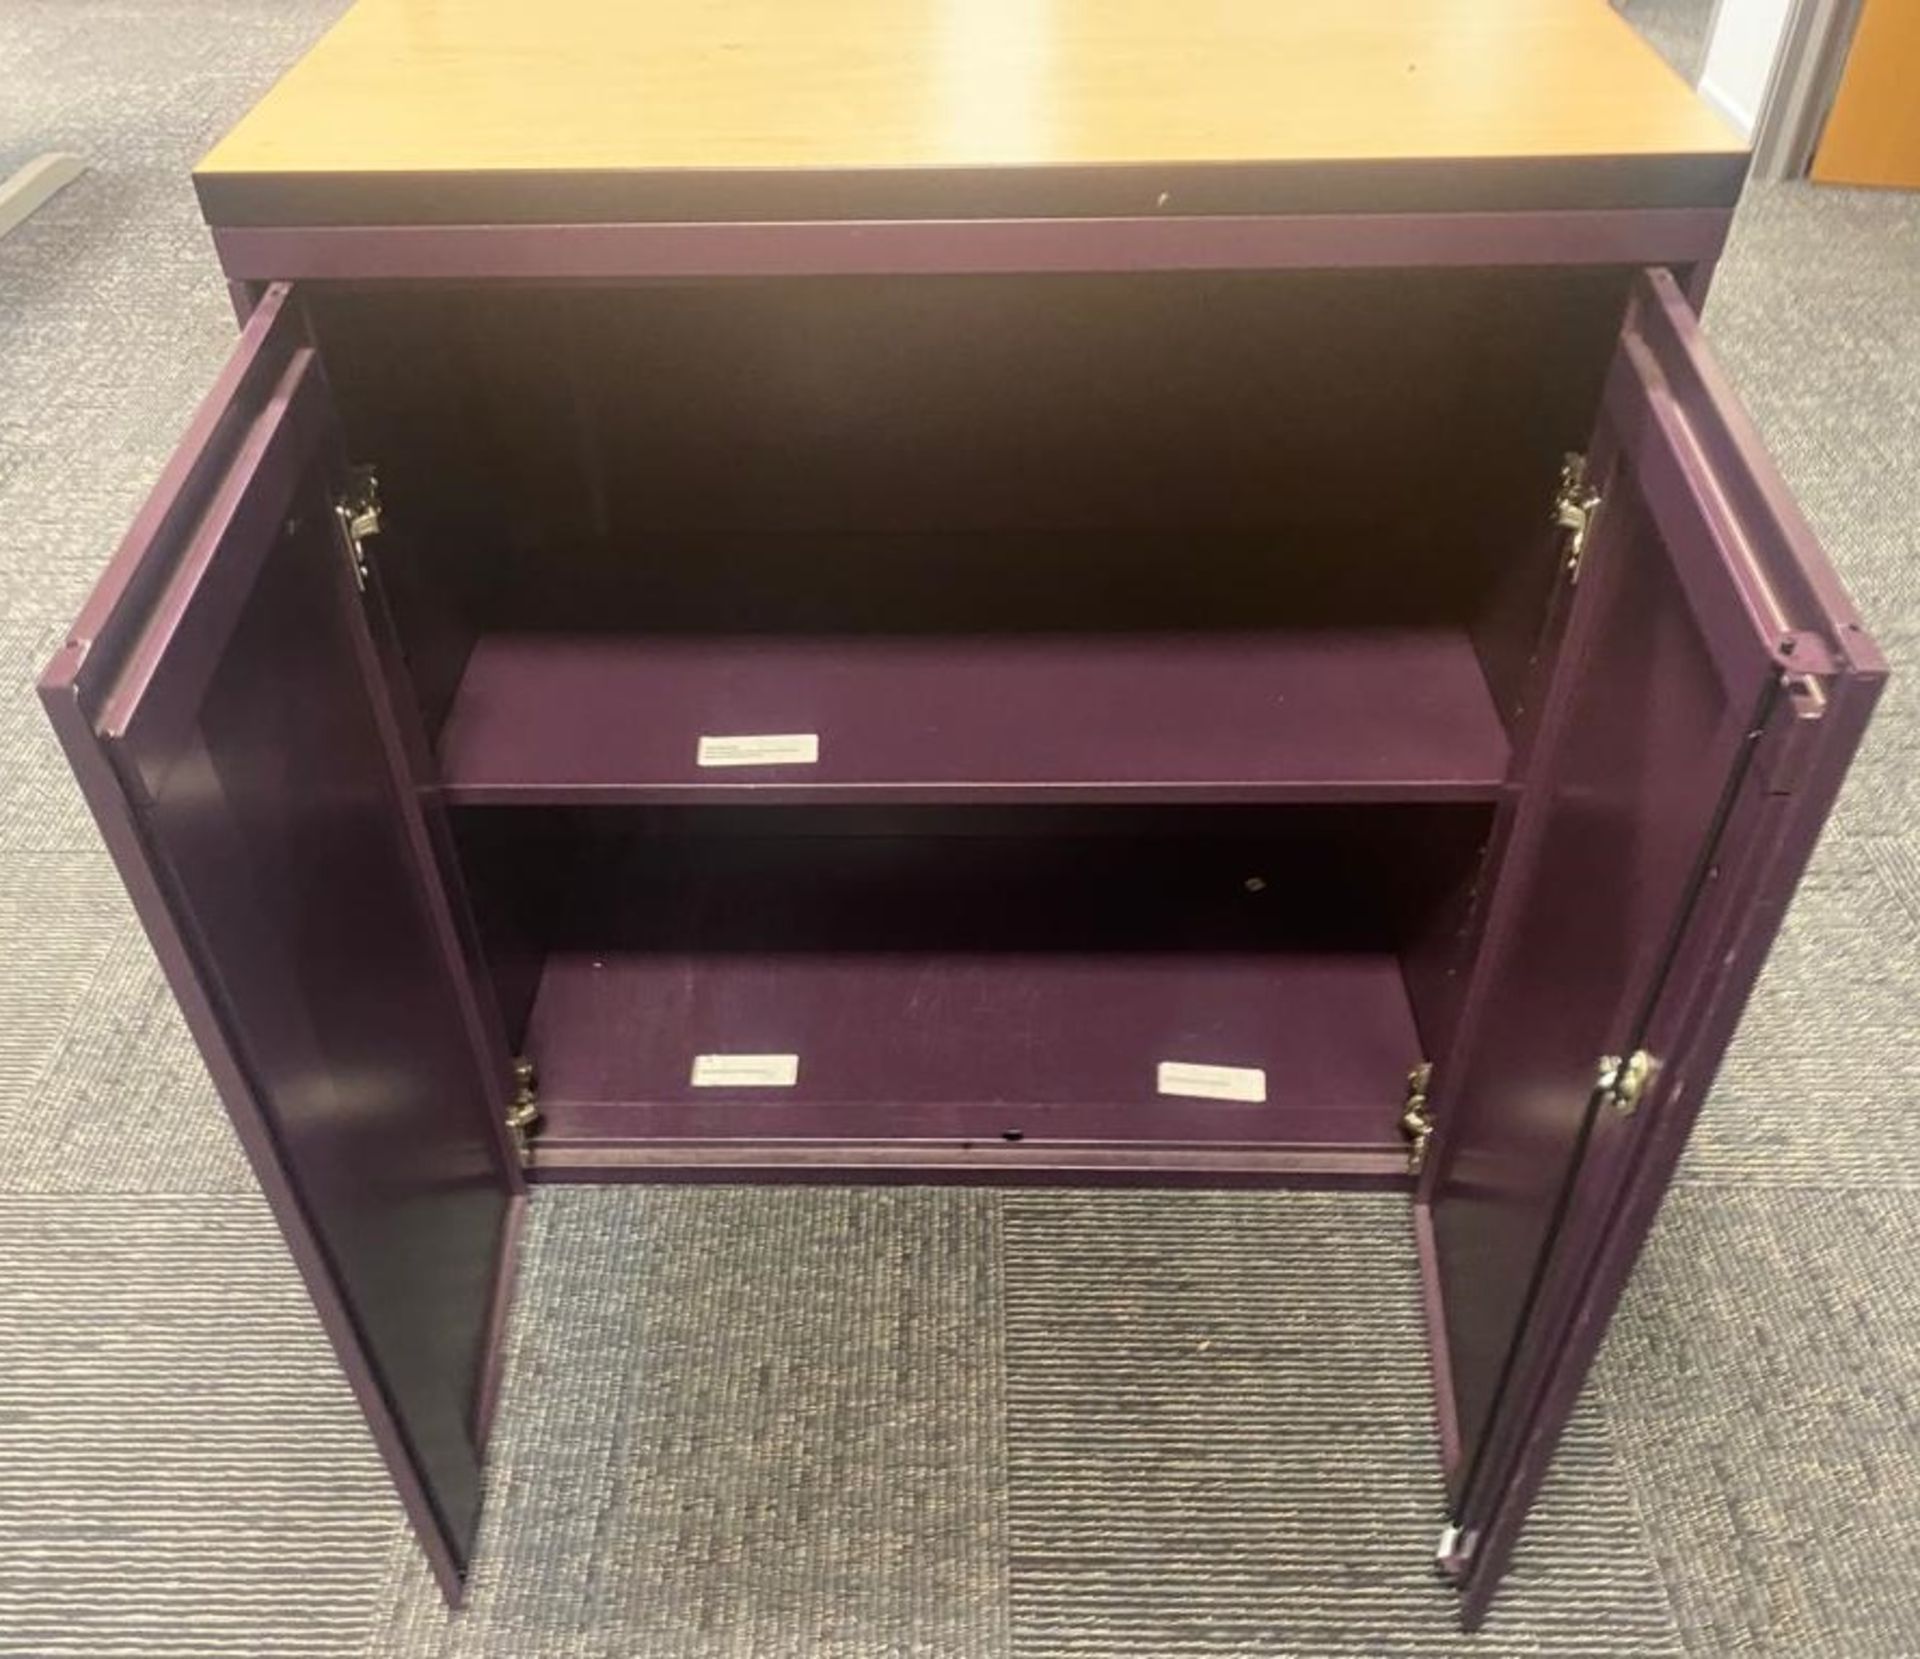 1 x Office Storage Cabinet For Files/Stationary - Features a Contemporary Purple Finish - Image 2 of 3